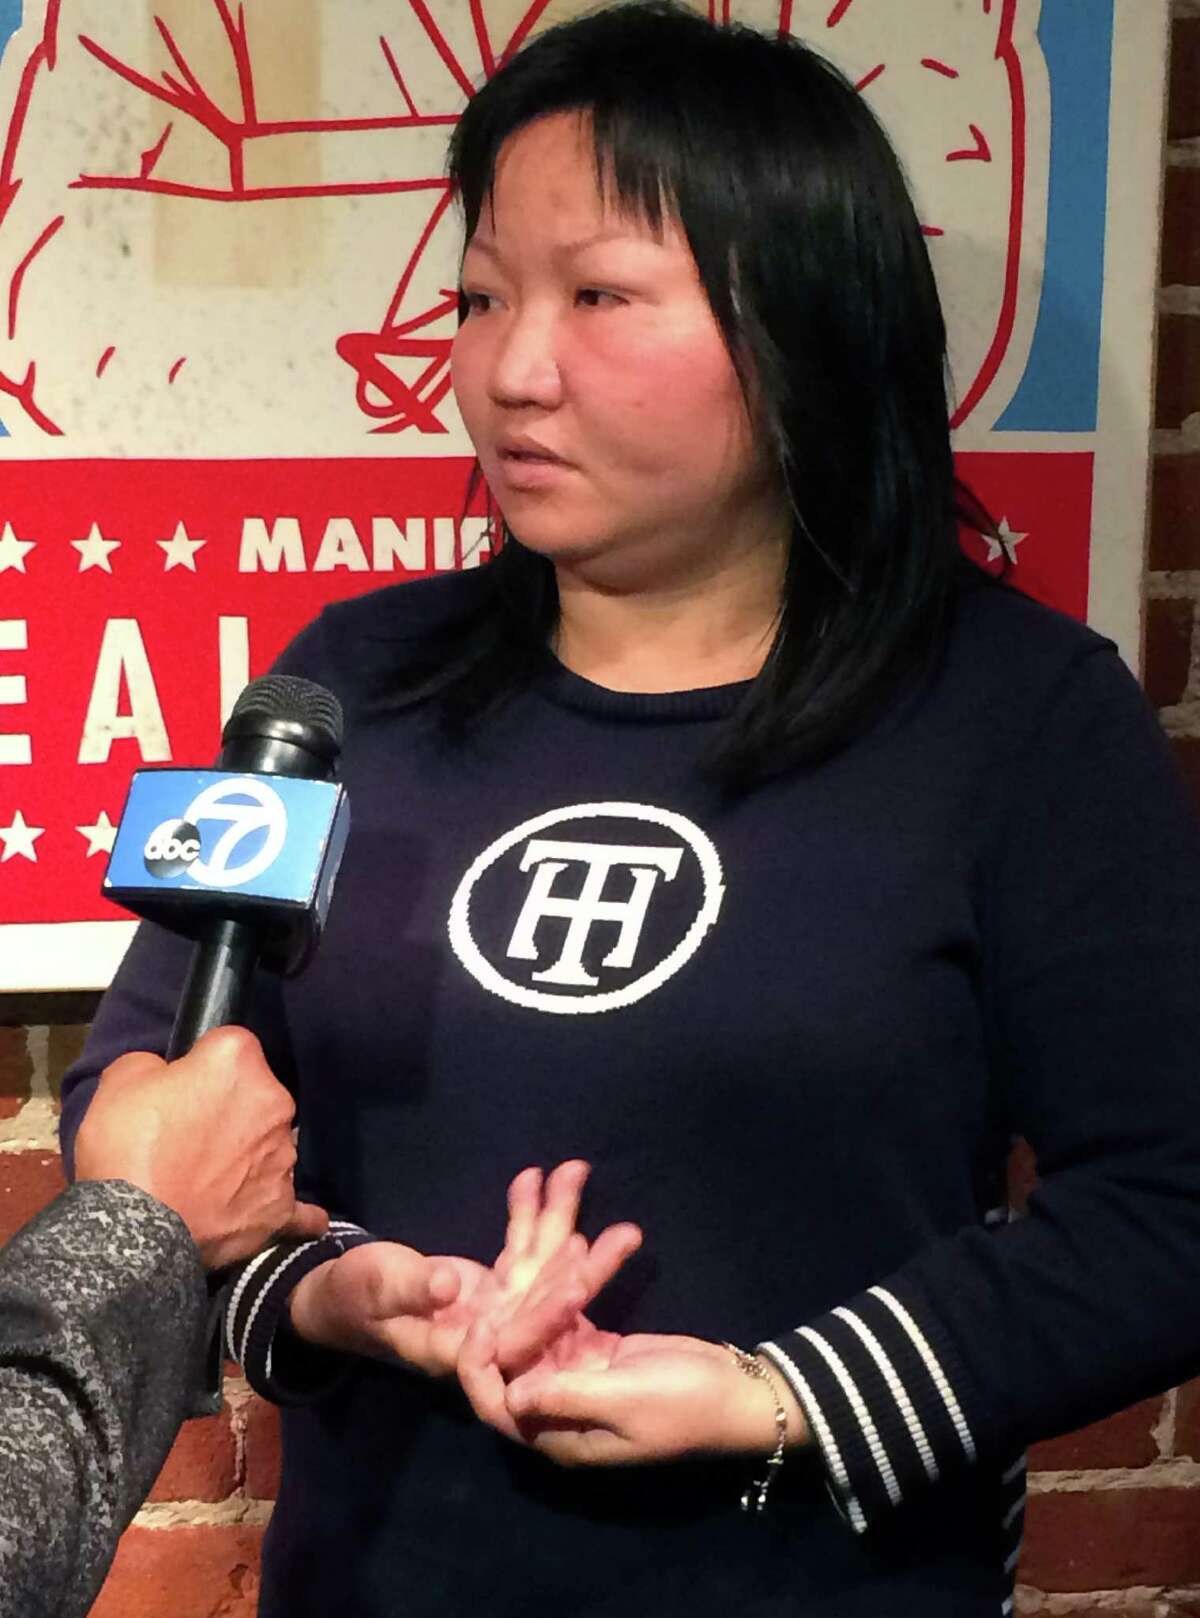 Huan Kuang addresses the media during a press conference on December 9, 2014 in San Francisco, California, regarding the sentencing the Uber driver who struck Kuang and her two children, killing her six-year-old daughter, Sofia Liu. The driver, Syed Muzaffar, 57, of Union City, is charged with misdemeanor vehicular manslaughter in connection with the crash.